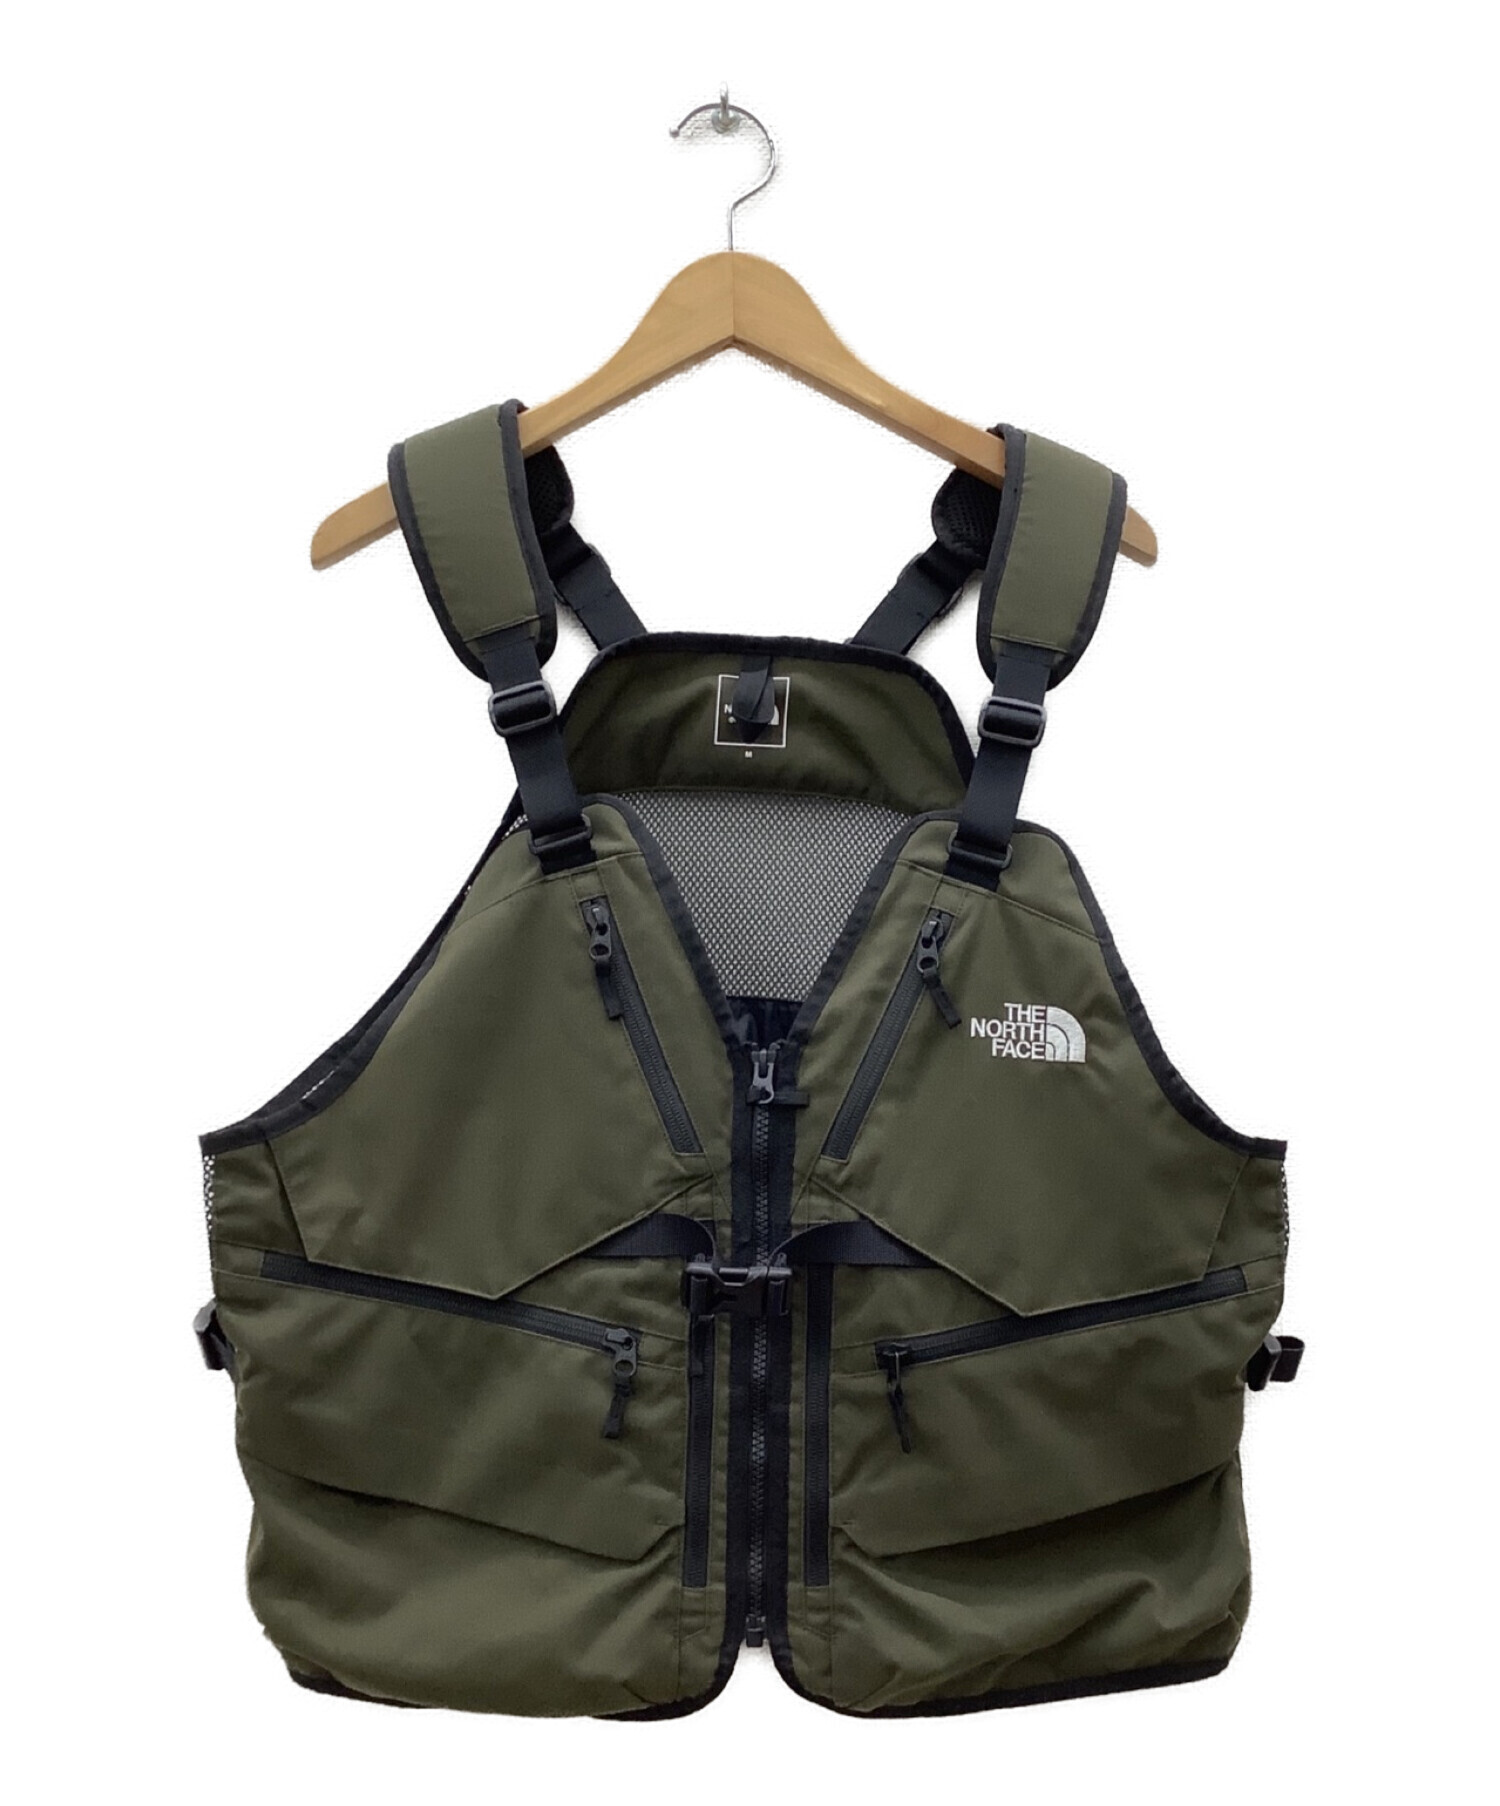 THE NORTH FACE Angler Vest 品 Mサイズ - www.mst.oos.mybluehost.me